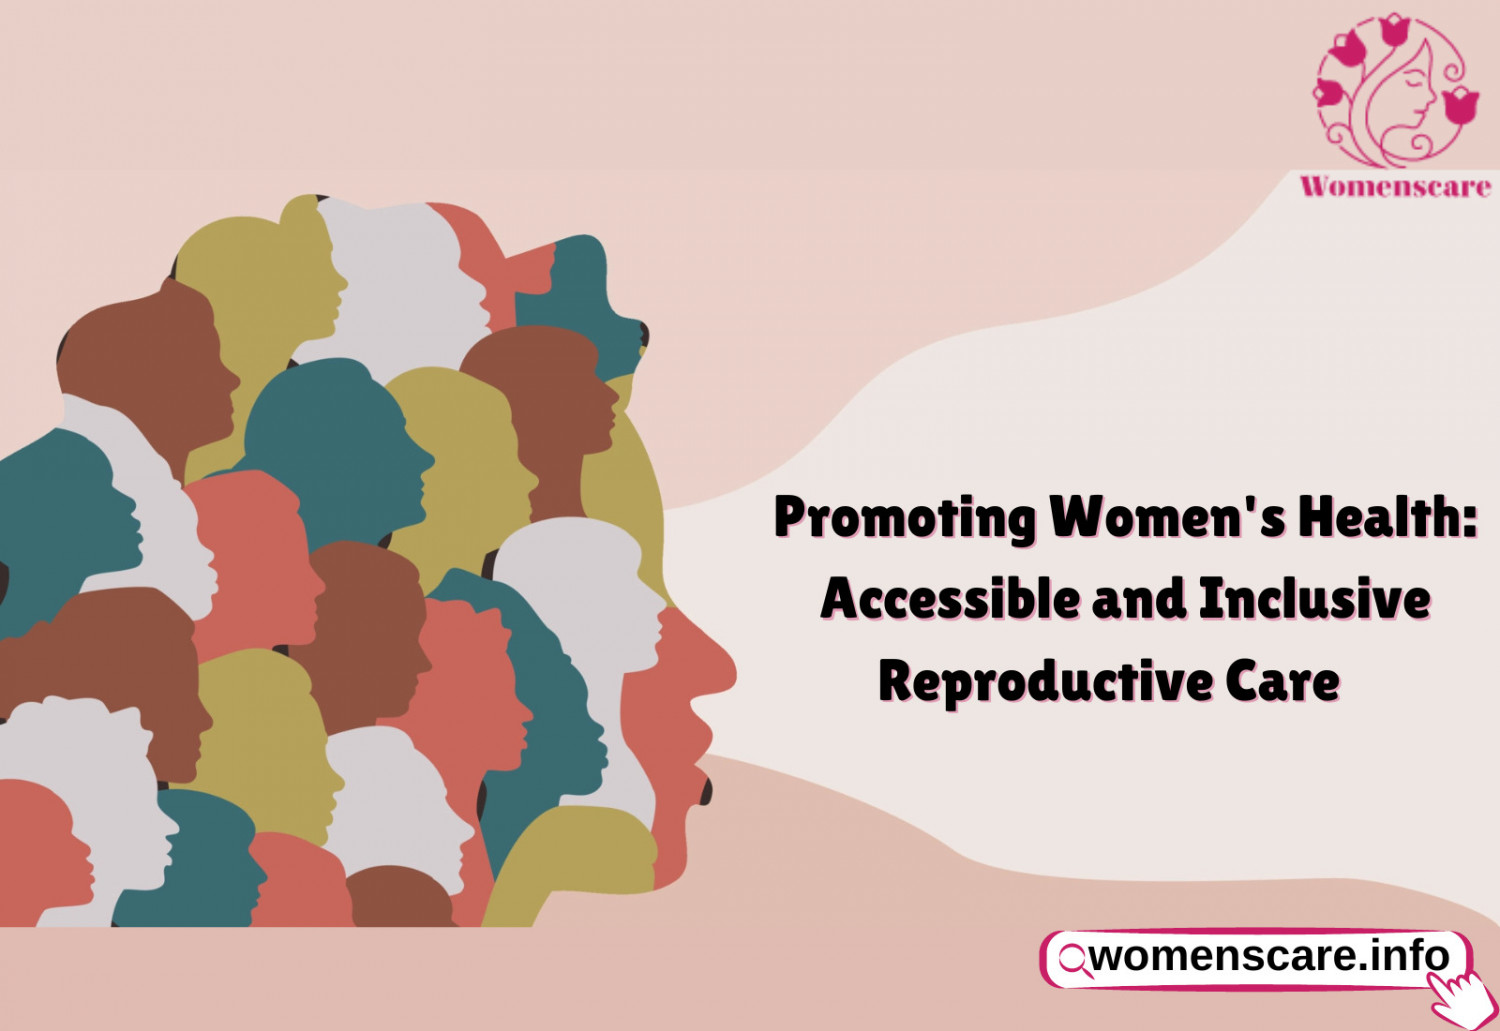 Promoting Women's Health: Accessible and Inclusive Reproductive Care     Infographic